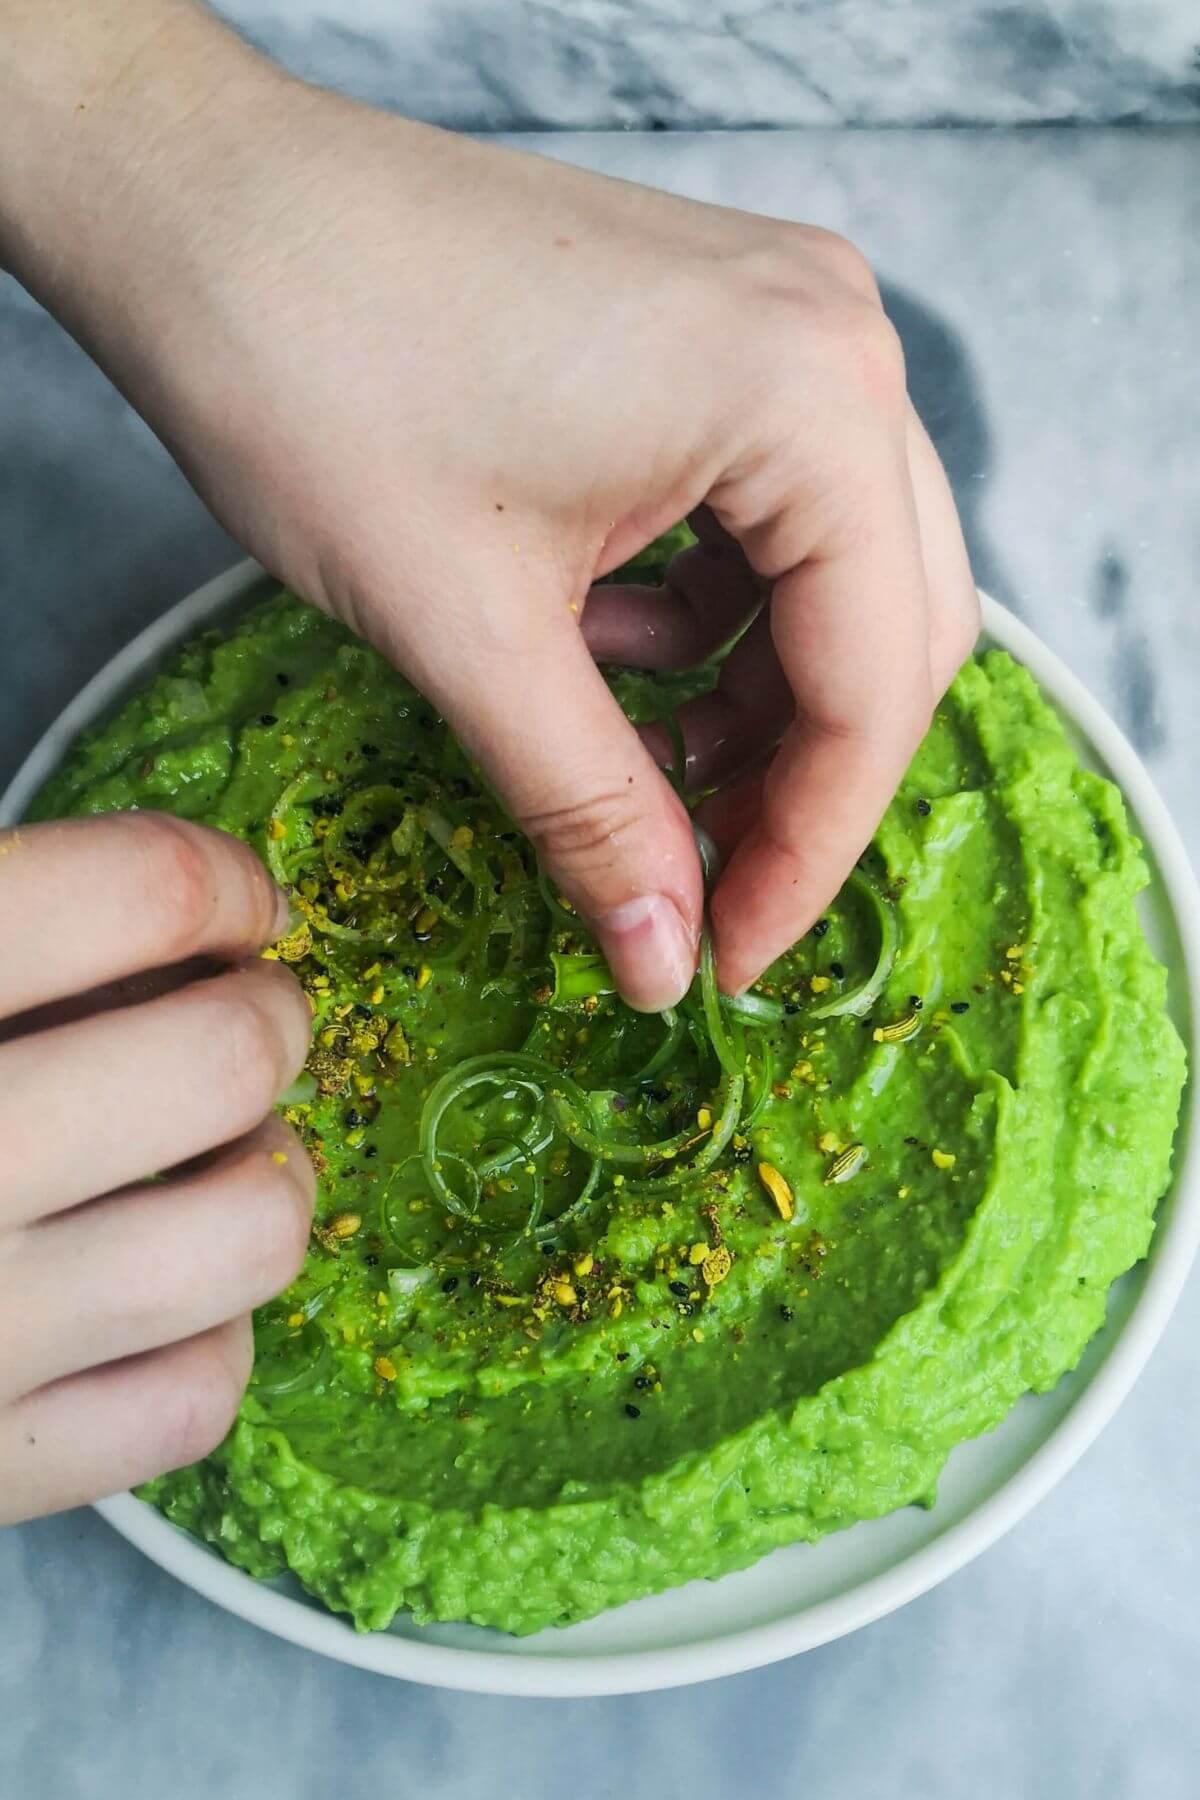 Hands adding curly spring onions to the plate of pea hummus on a grey marble background.